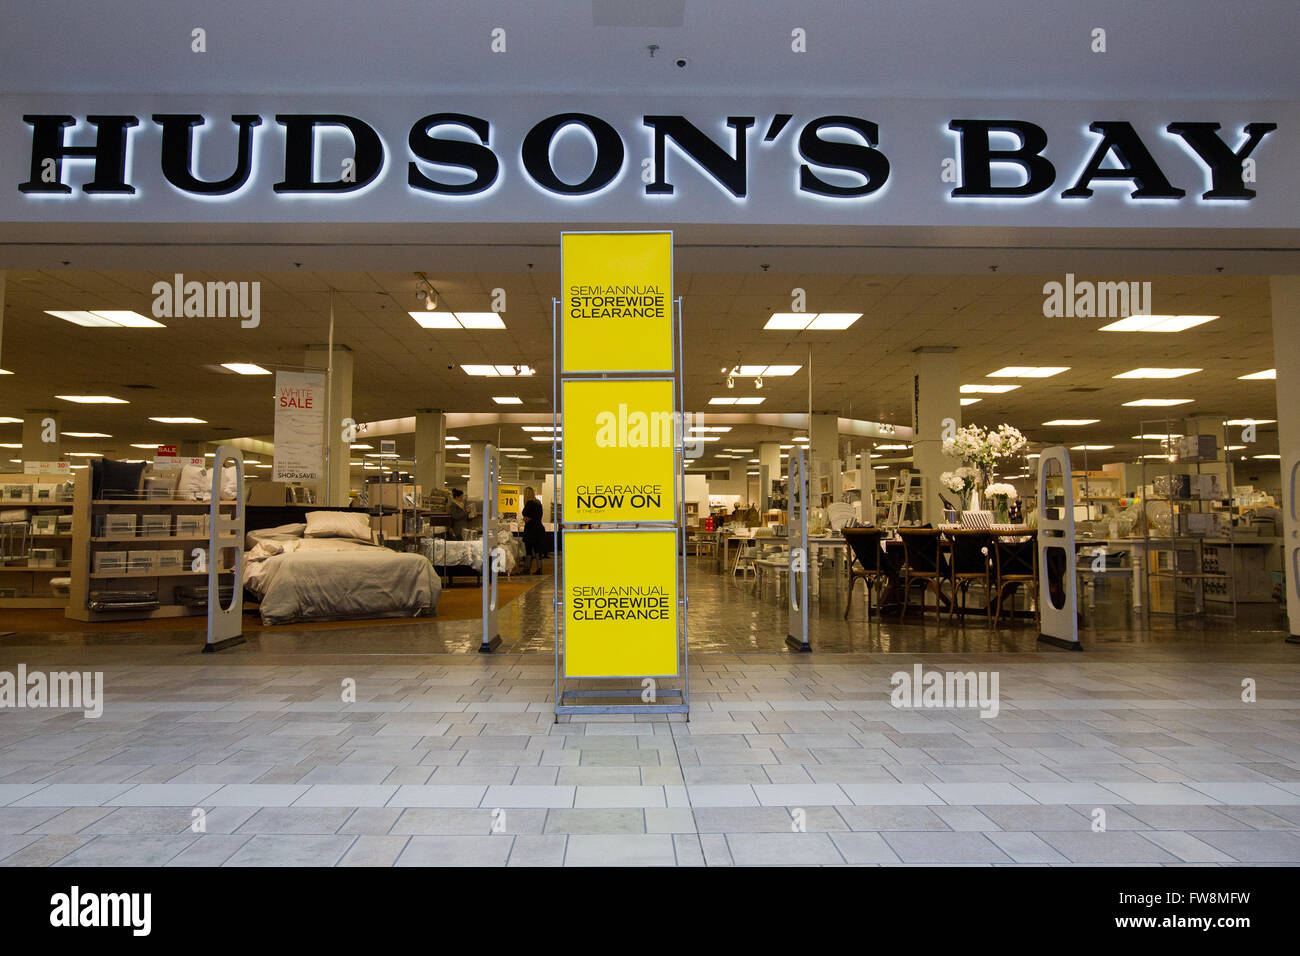 https://c8.alamy.com/comp/FW8MFW/the-hudsons-bay-department-store-at-the-cataraqui-town-centre-in-kingston-FW8MFW.jpg